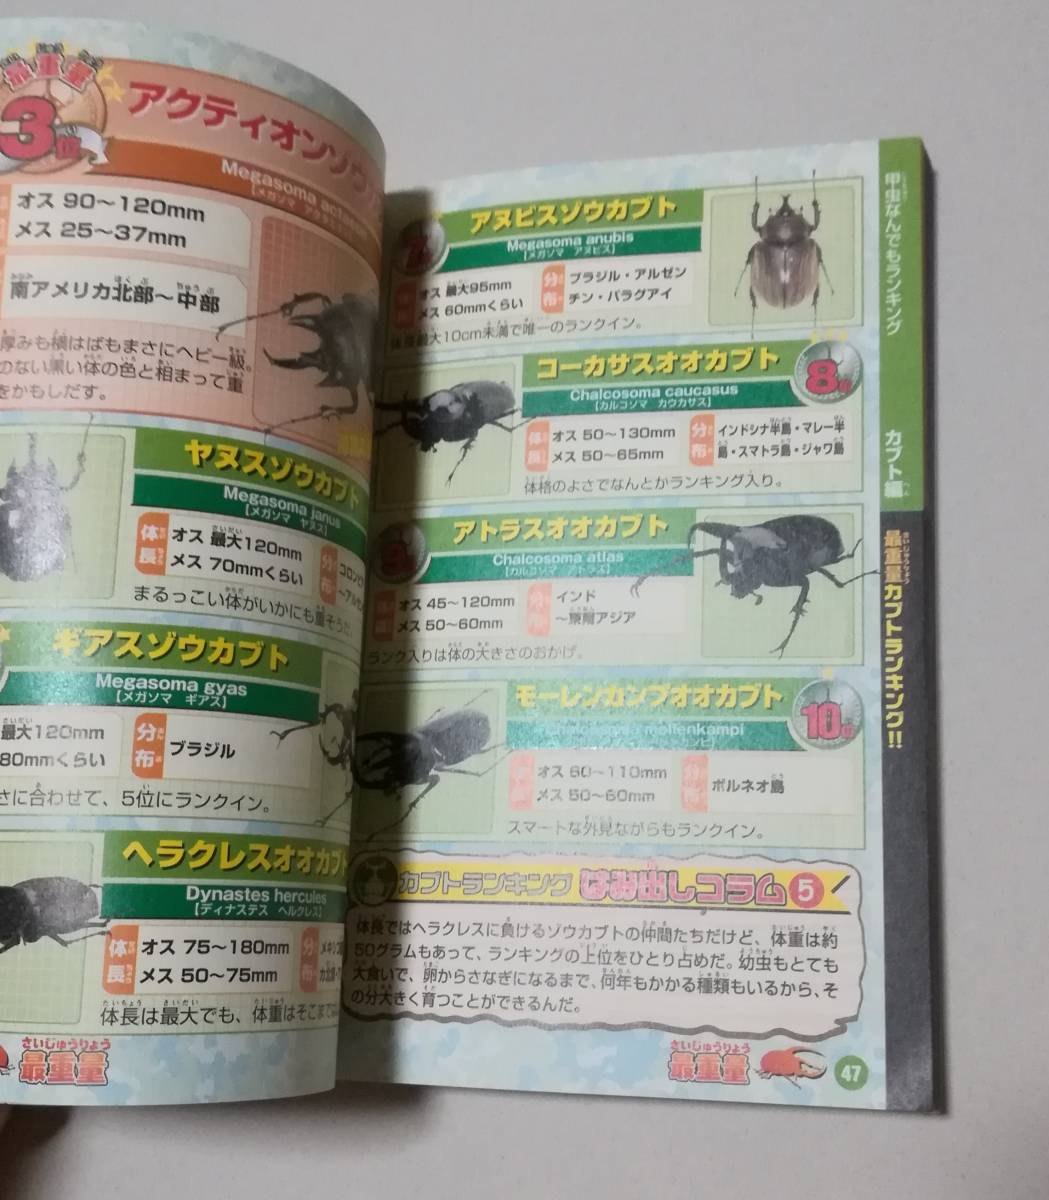  stag beetle & Kabuto . insect ranking large various subjects issue day 2005 year 9 month 